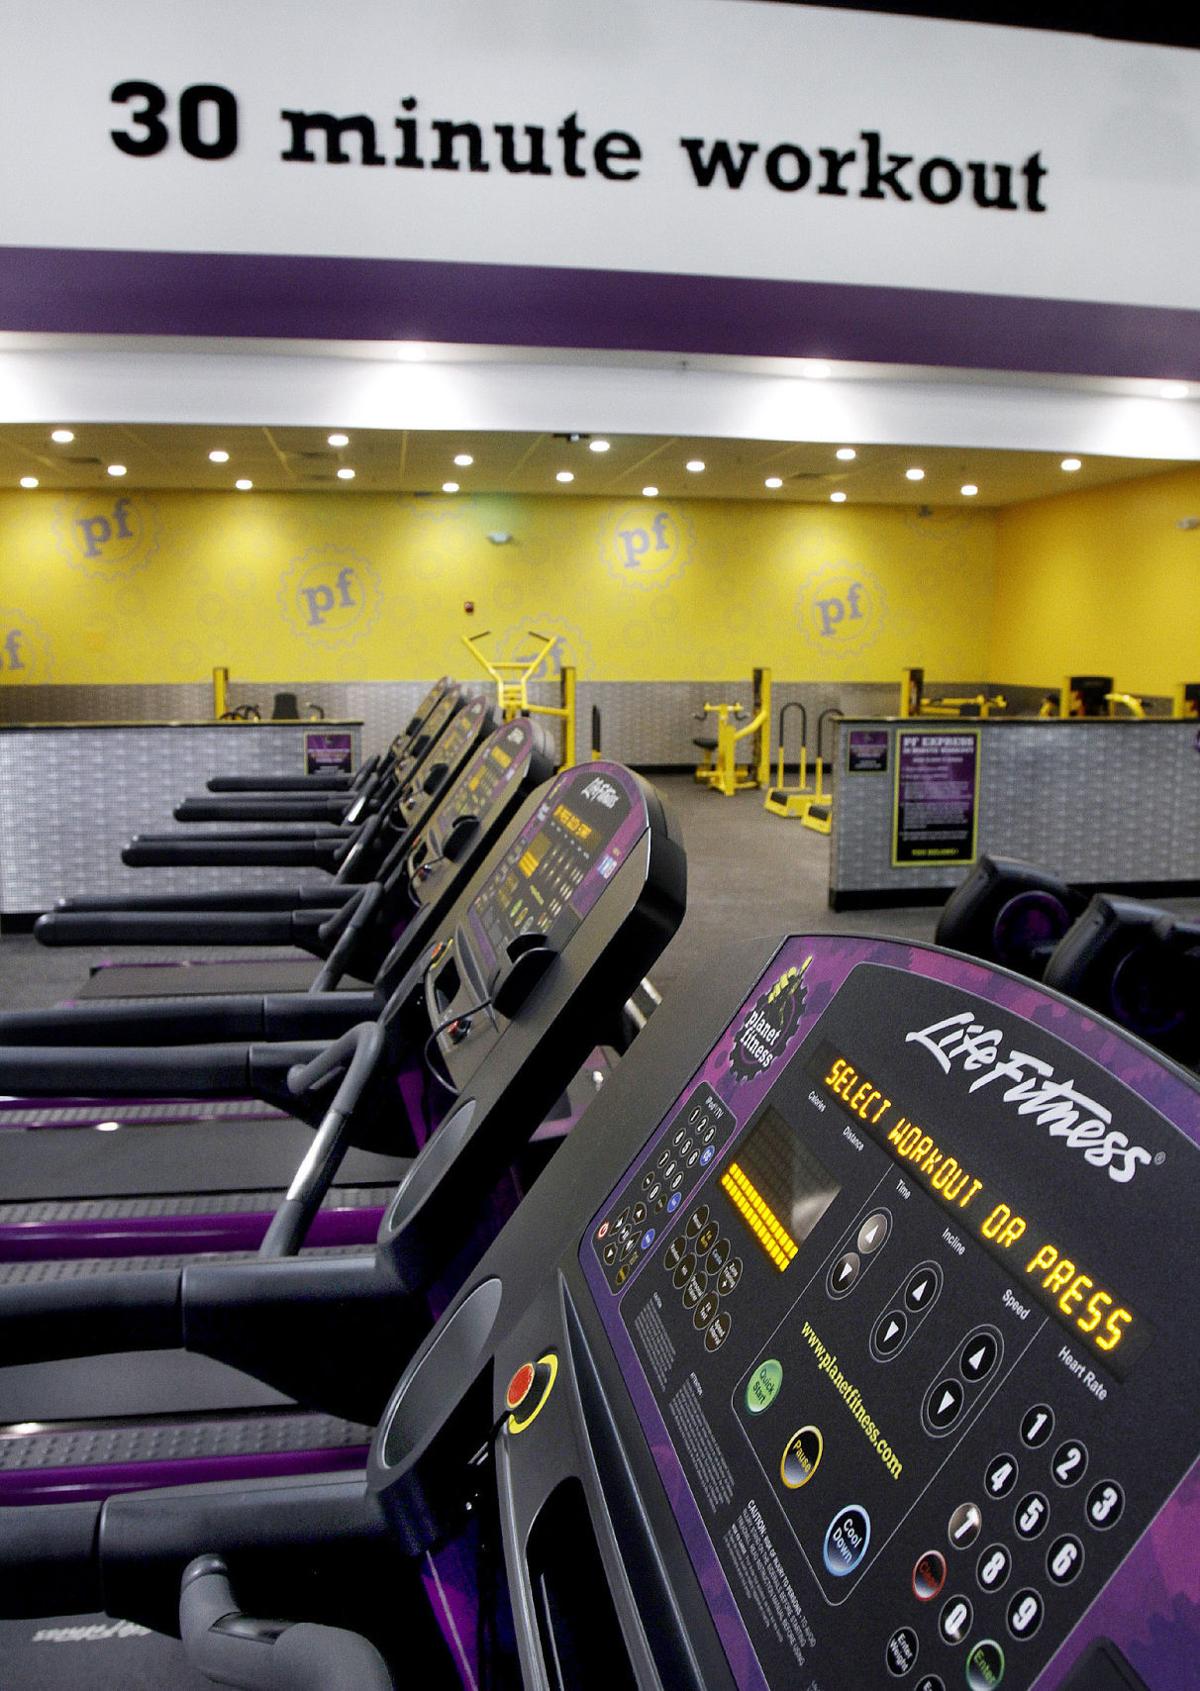 15 Minute How To Get Hired At Planet Fitness for Burn Fat fast